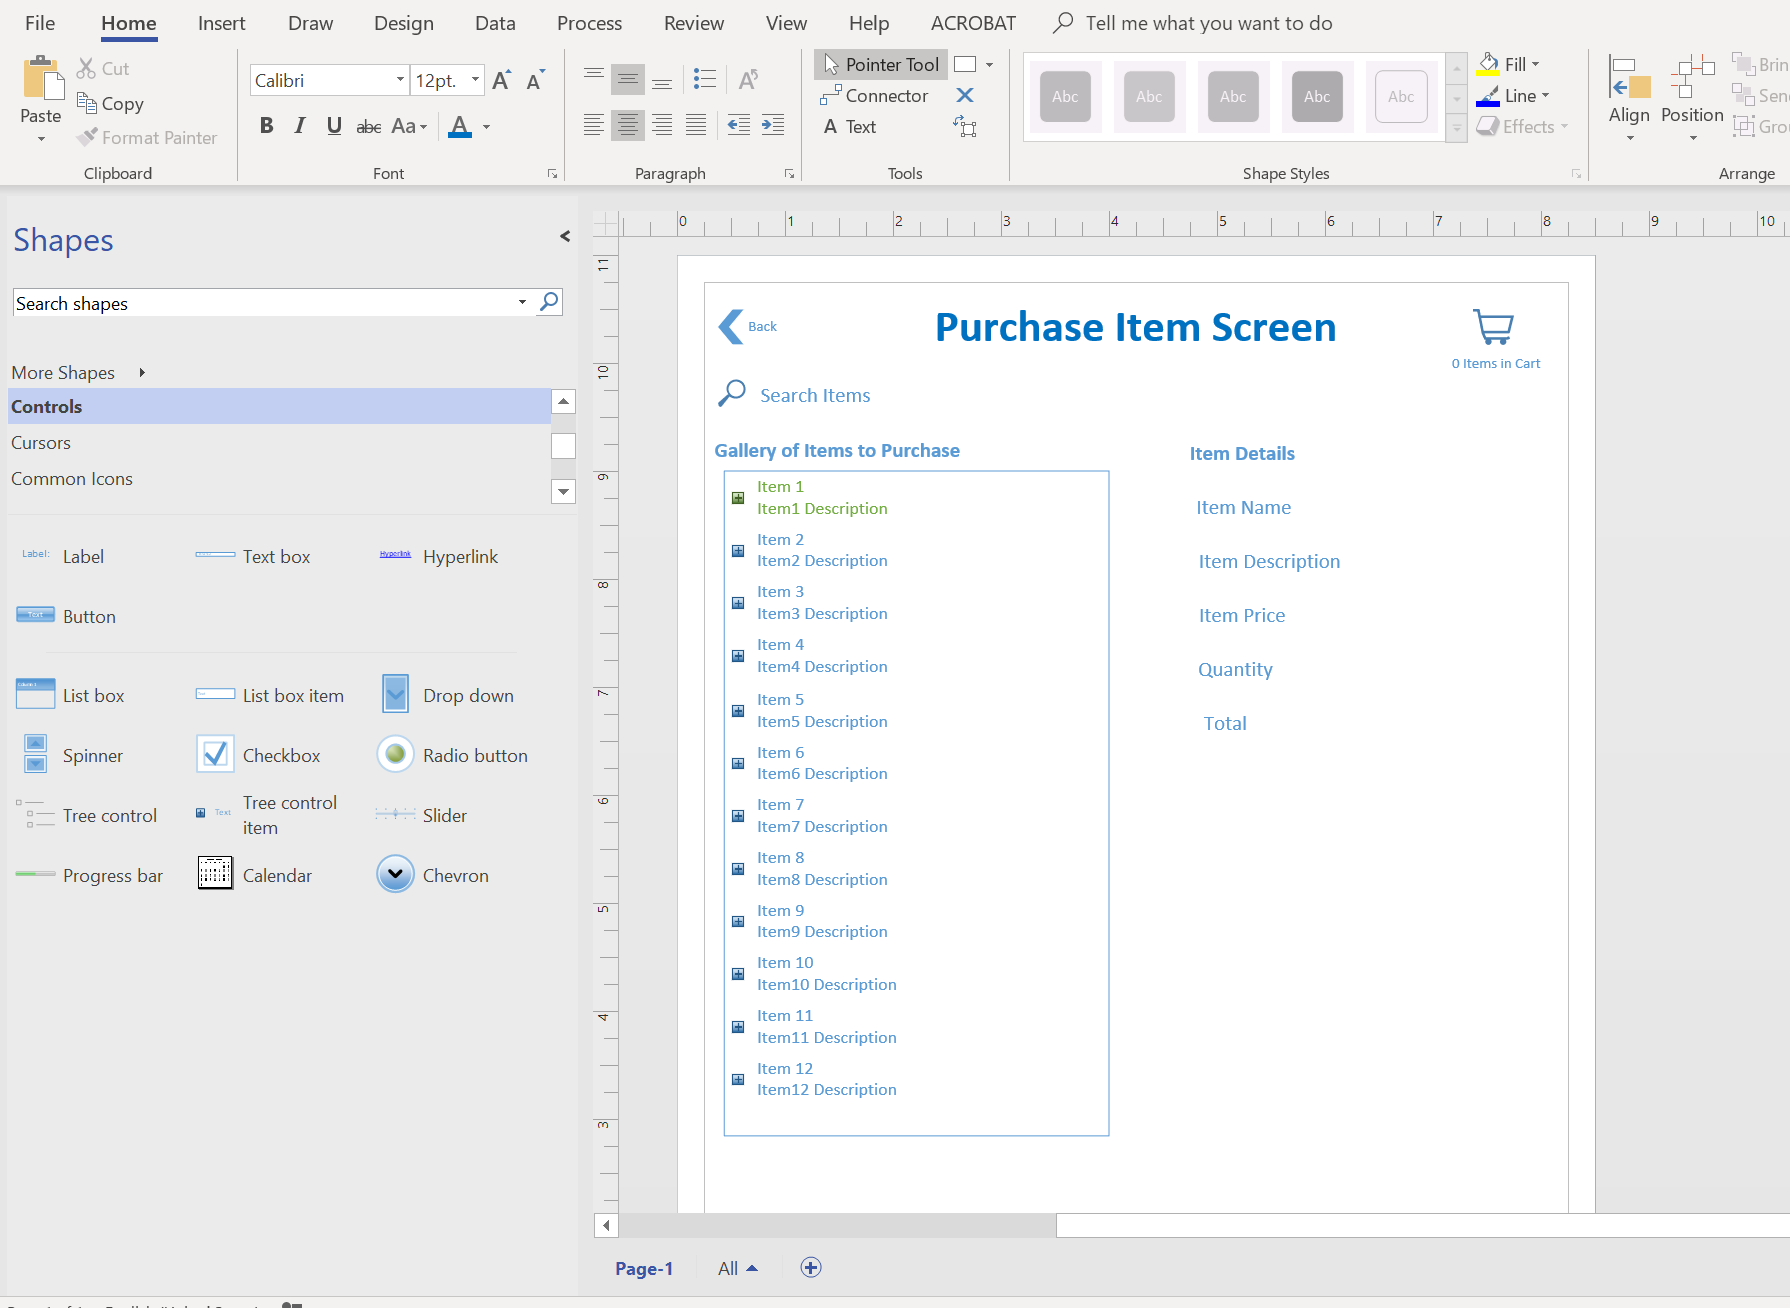 Screenshot example of a simple Visio wireframe.